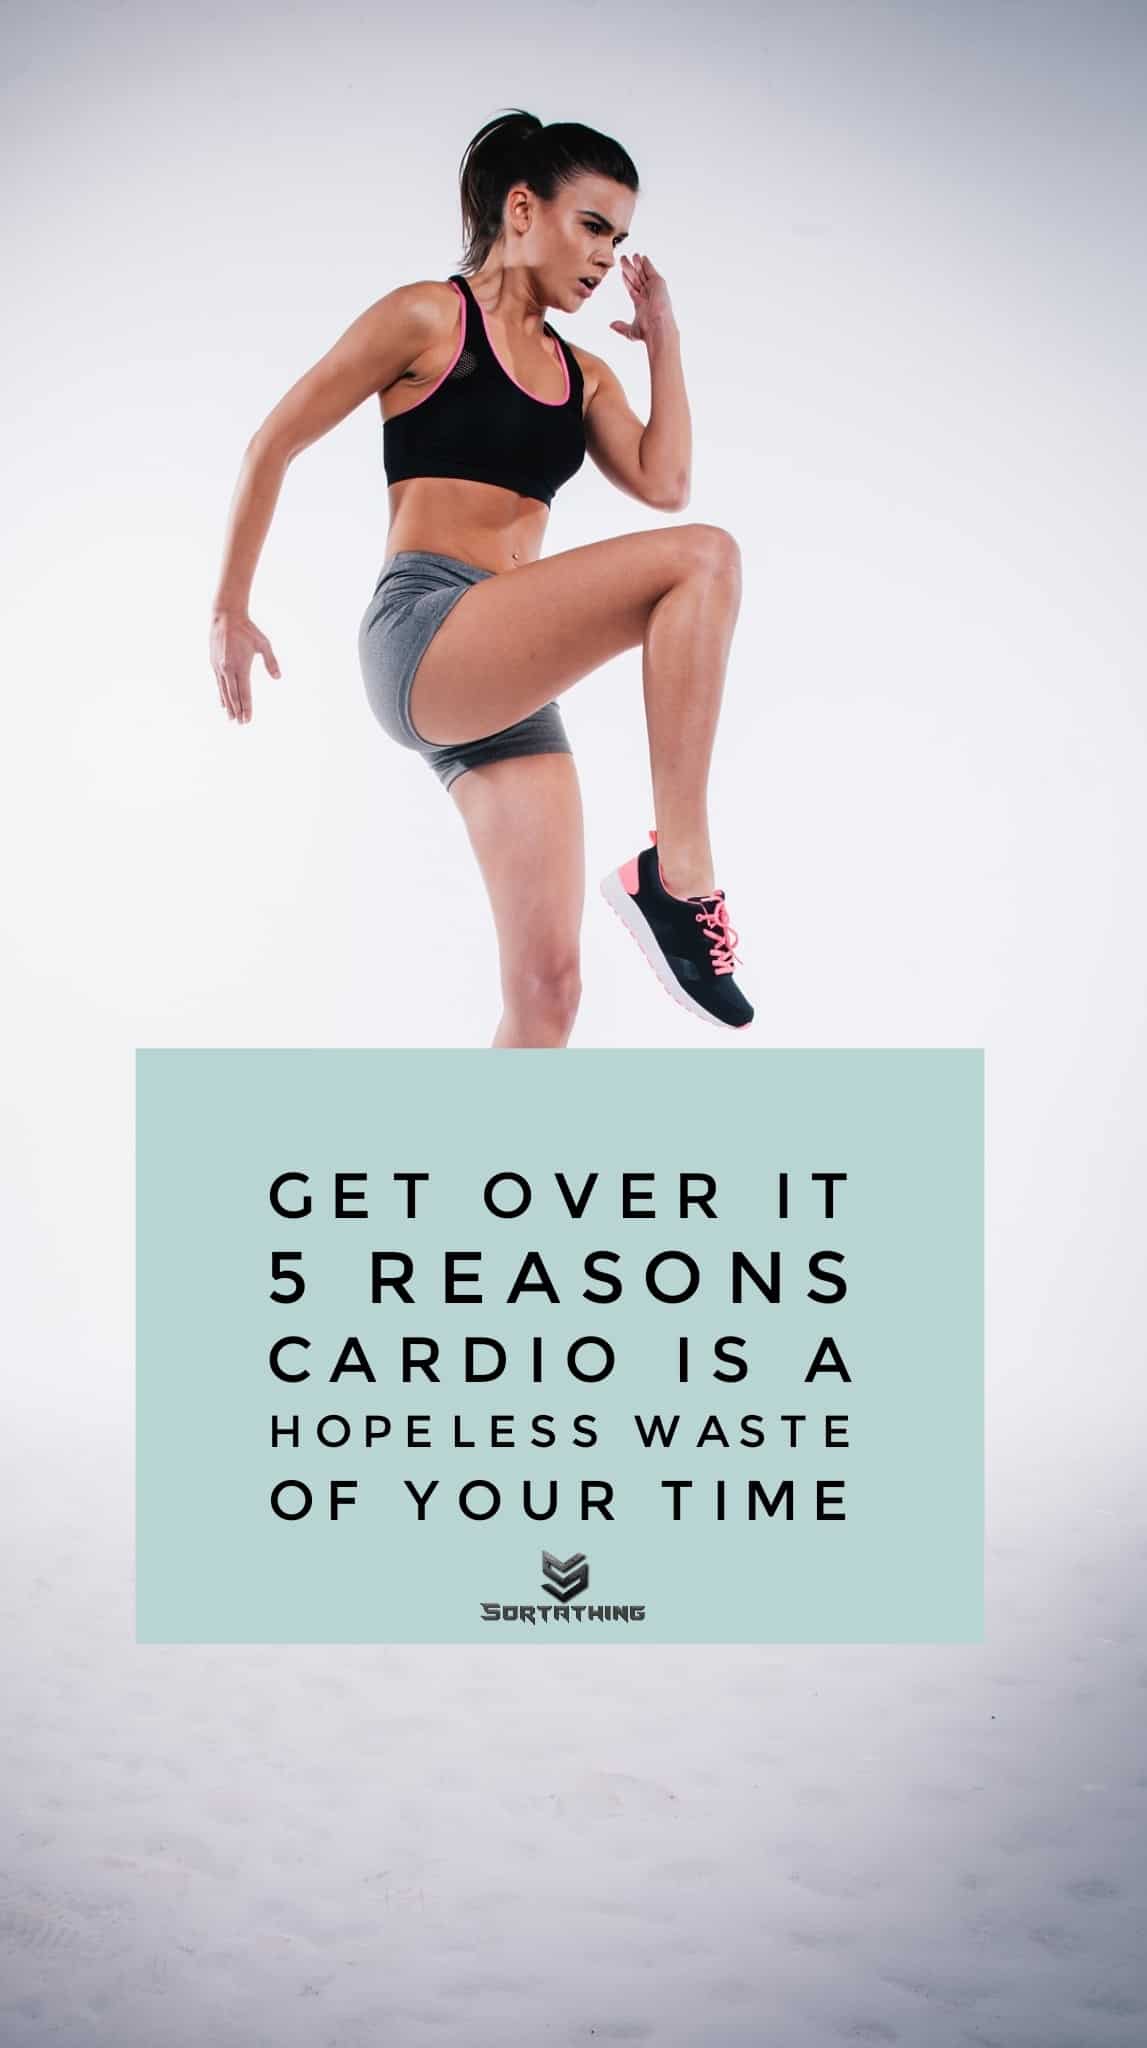 Cardio is a waste of your time